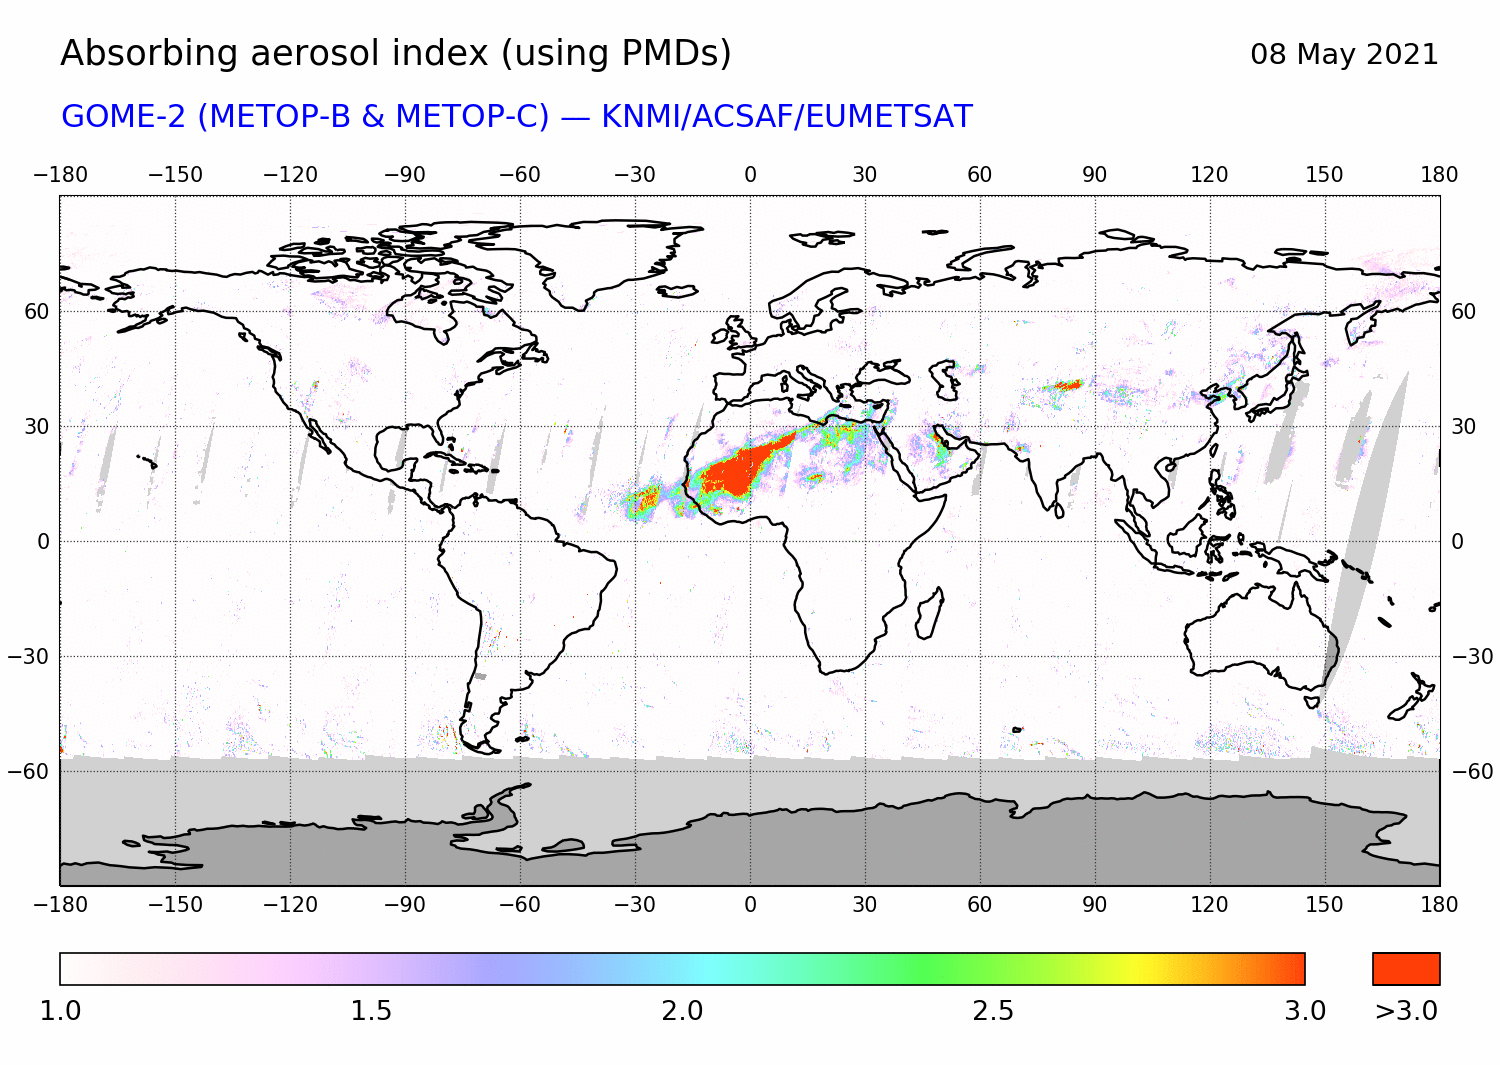 GOME-2 - Absorbing aerosol index of 08 May 2021